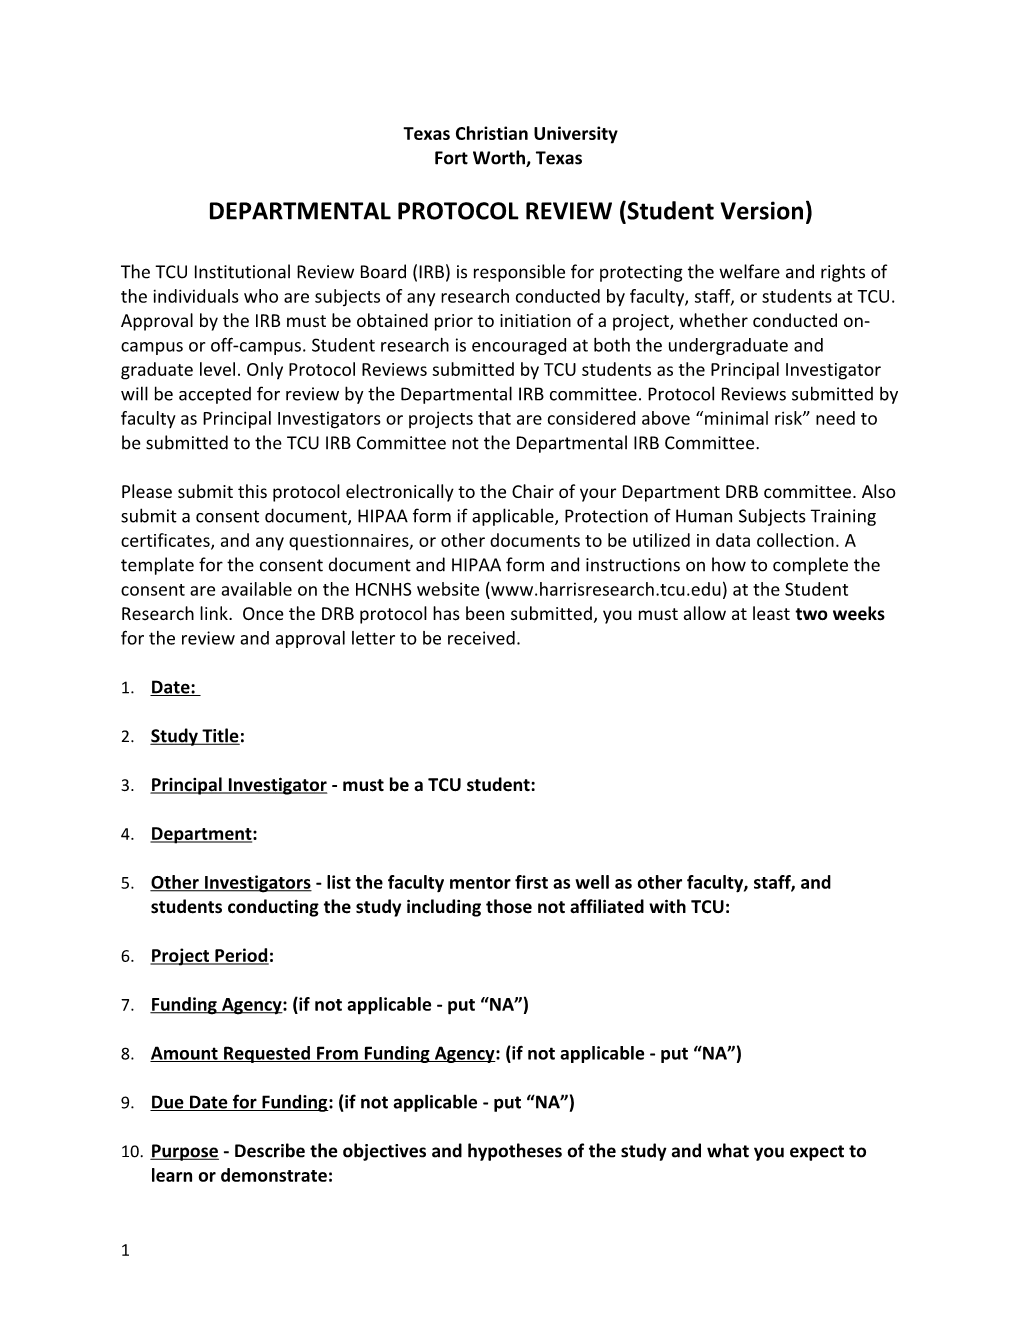 DEPARTMENTAL PROTOCOL REVIEW (Student Version)